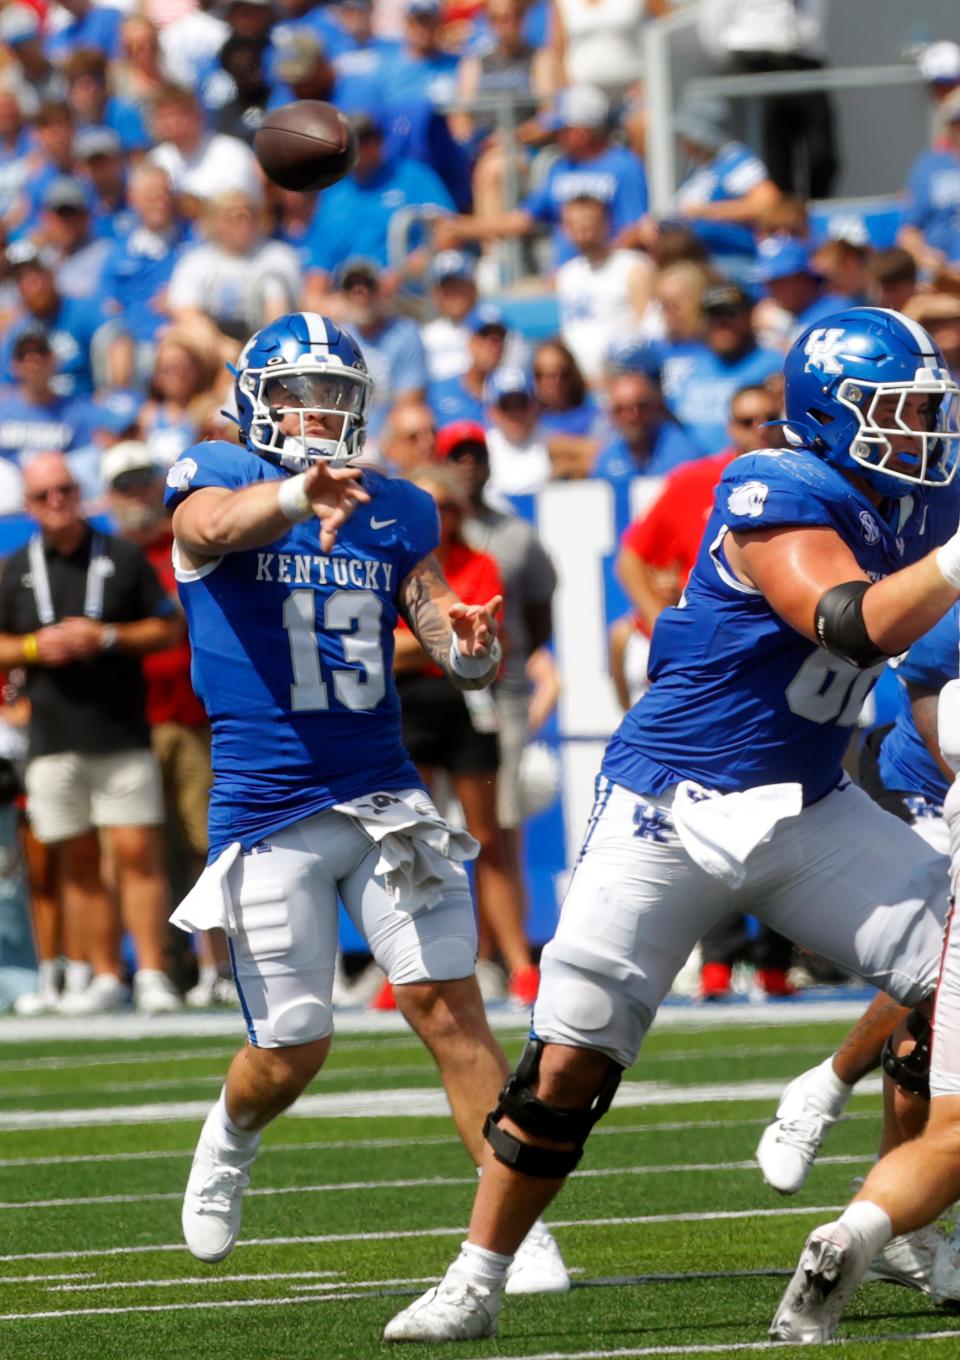 UK and quarterback Devin Leary are set to take on Akron this weekend.